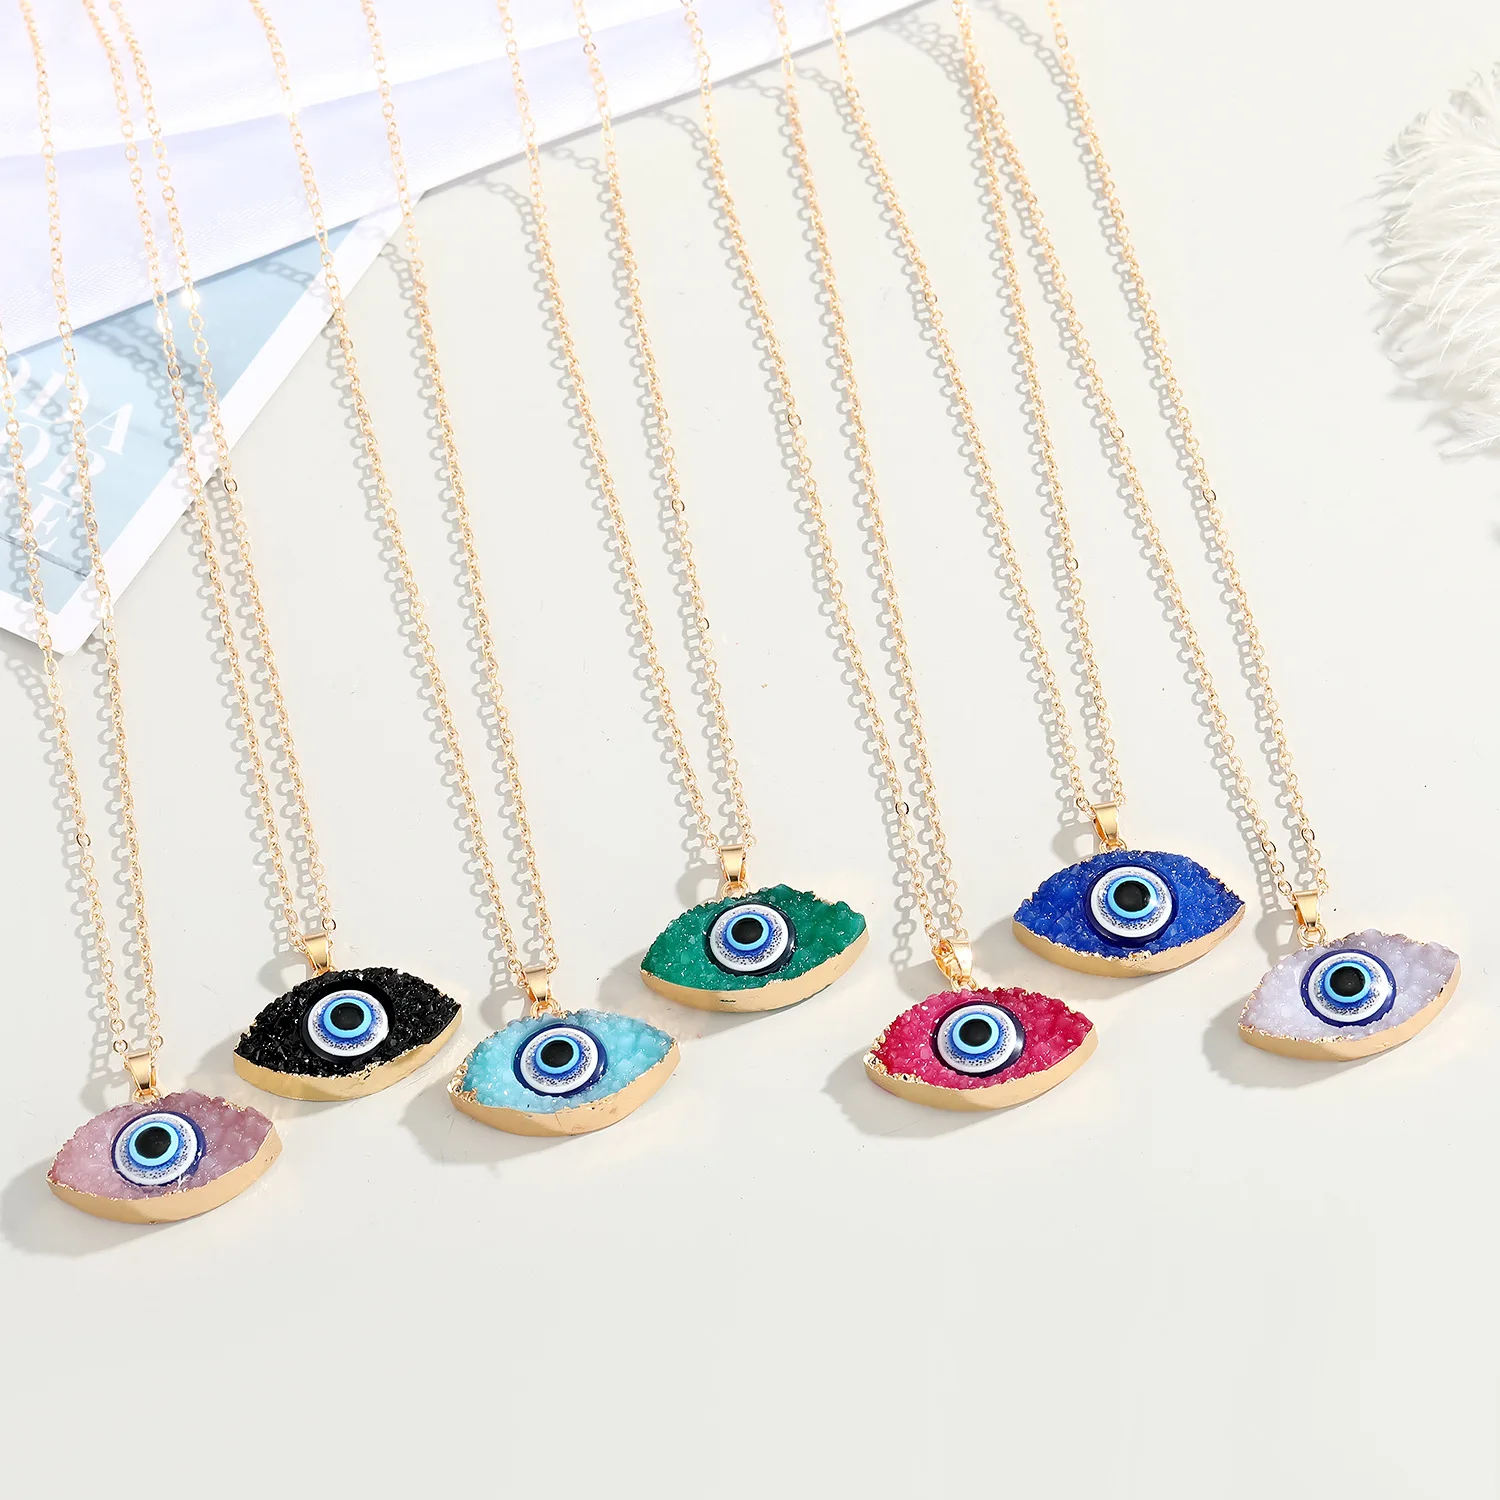 

Fashion Jewelry Gift New Fashion Color Turkish Demon Evil Eye Charm Necklace Simple Resin Eye Pendant